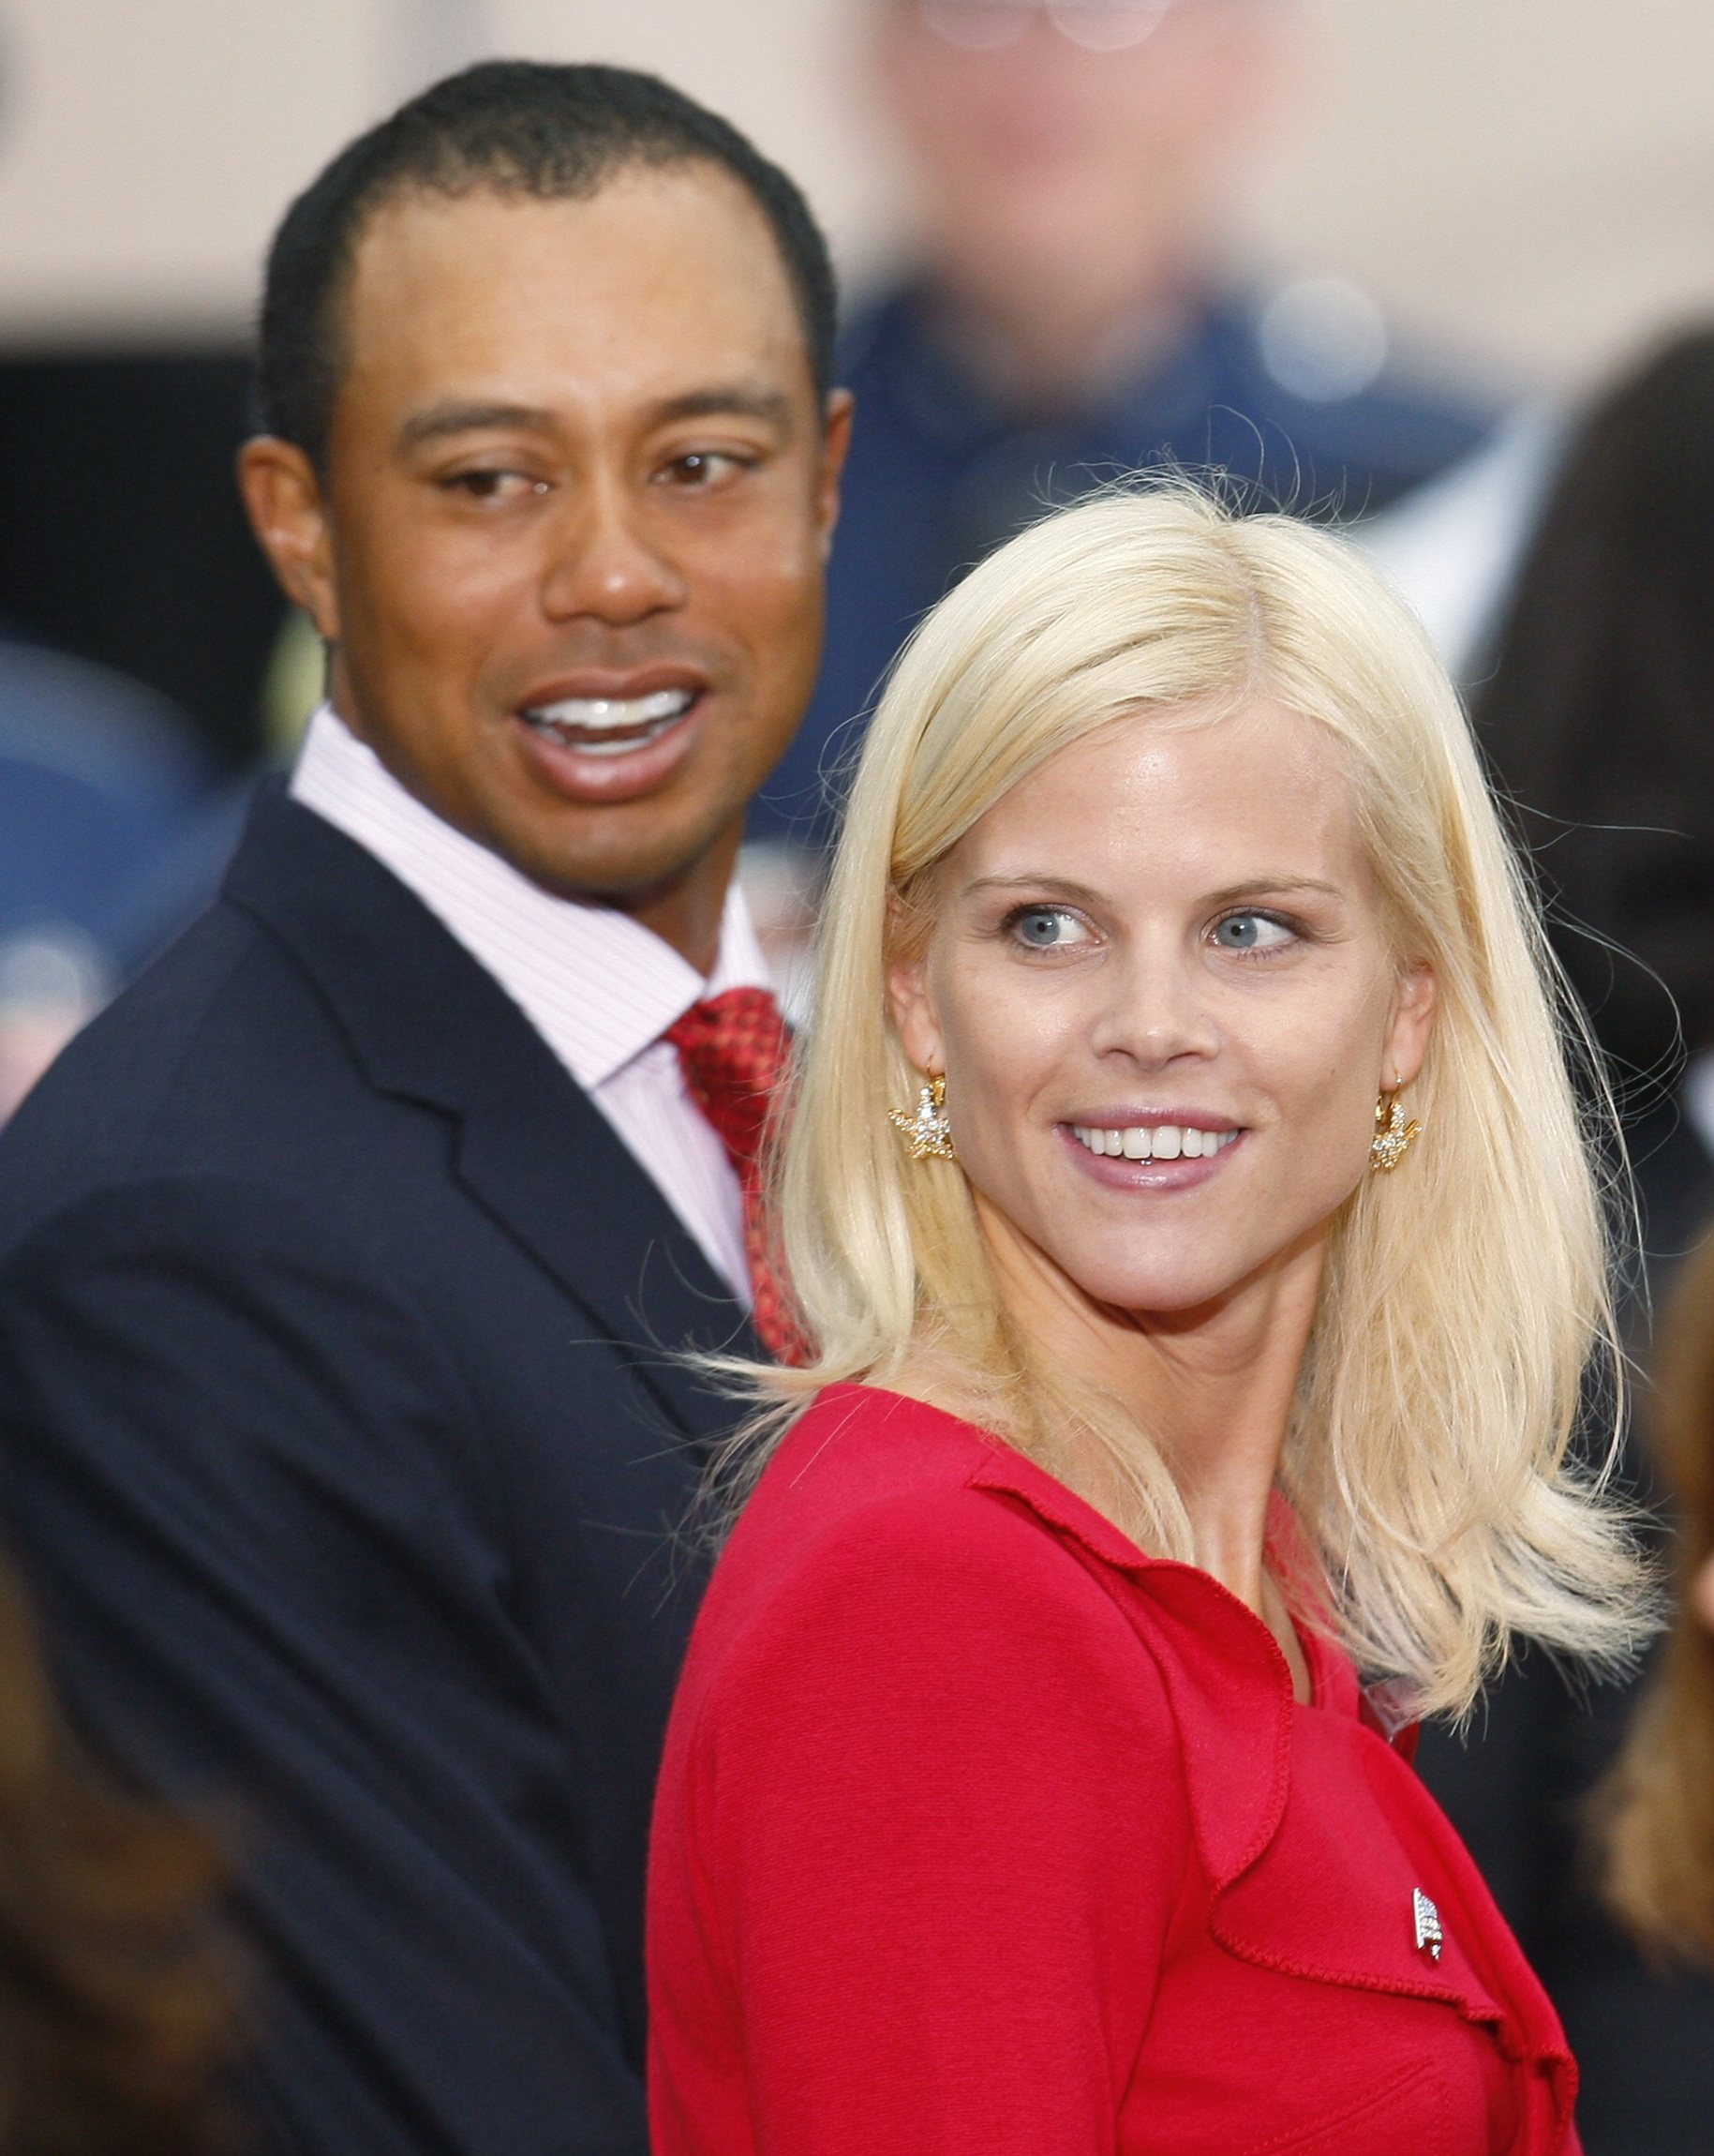 Golfer Tiger Woods departs closing ceremonies with his wife Elin Nordegren at the Presidents Cup golf tournament in San Francisco, California, in 2009. Photo: Reuters